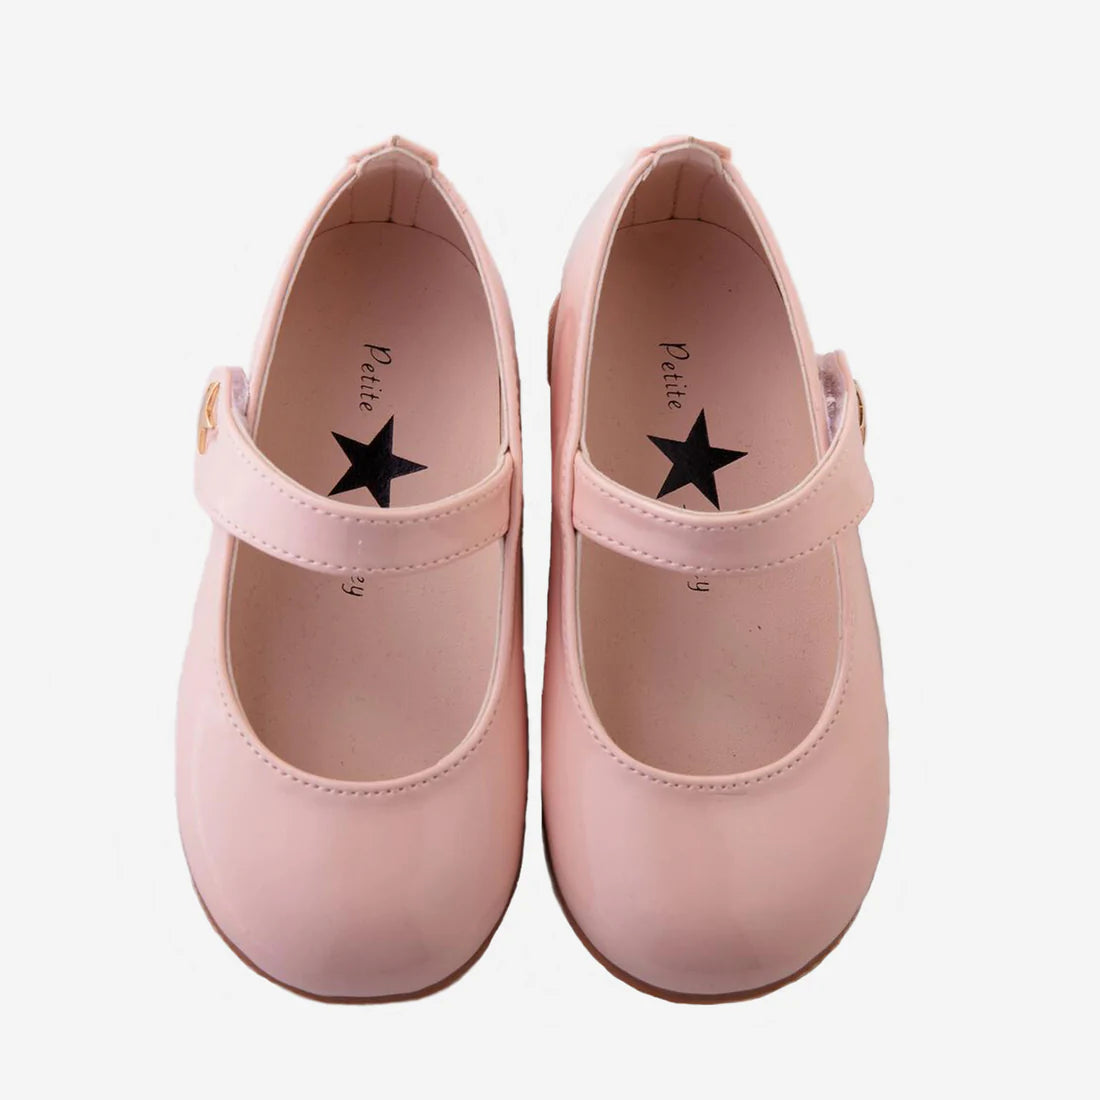 PETITE HAILEY PATENT MARYJANE SHOES - PALE PINK